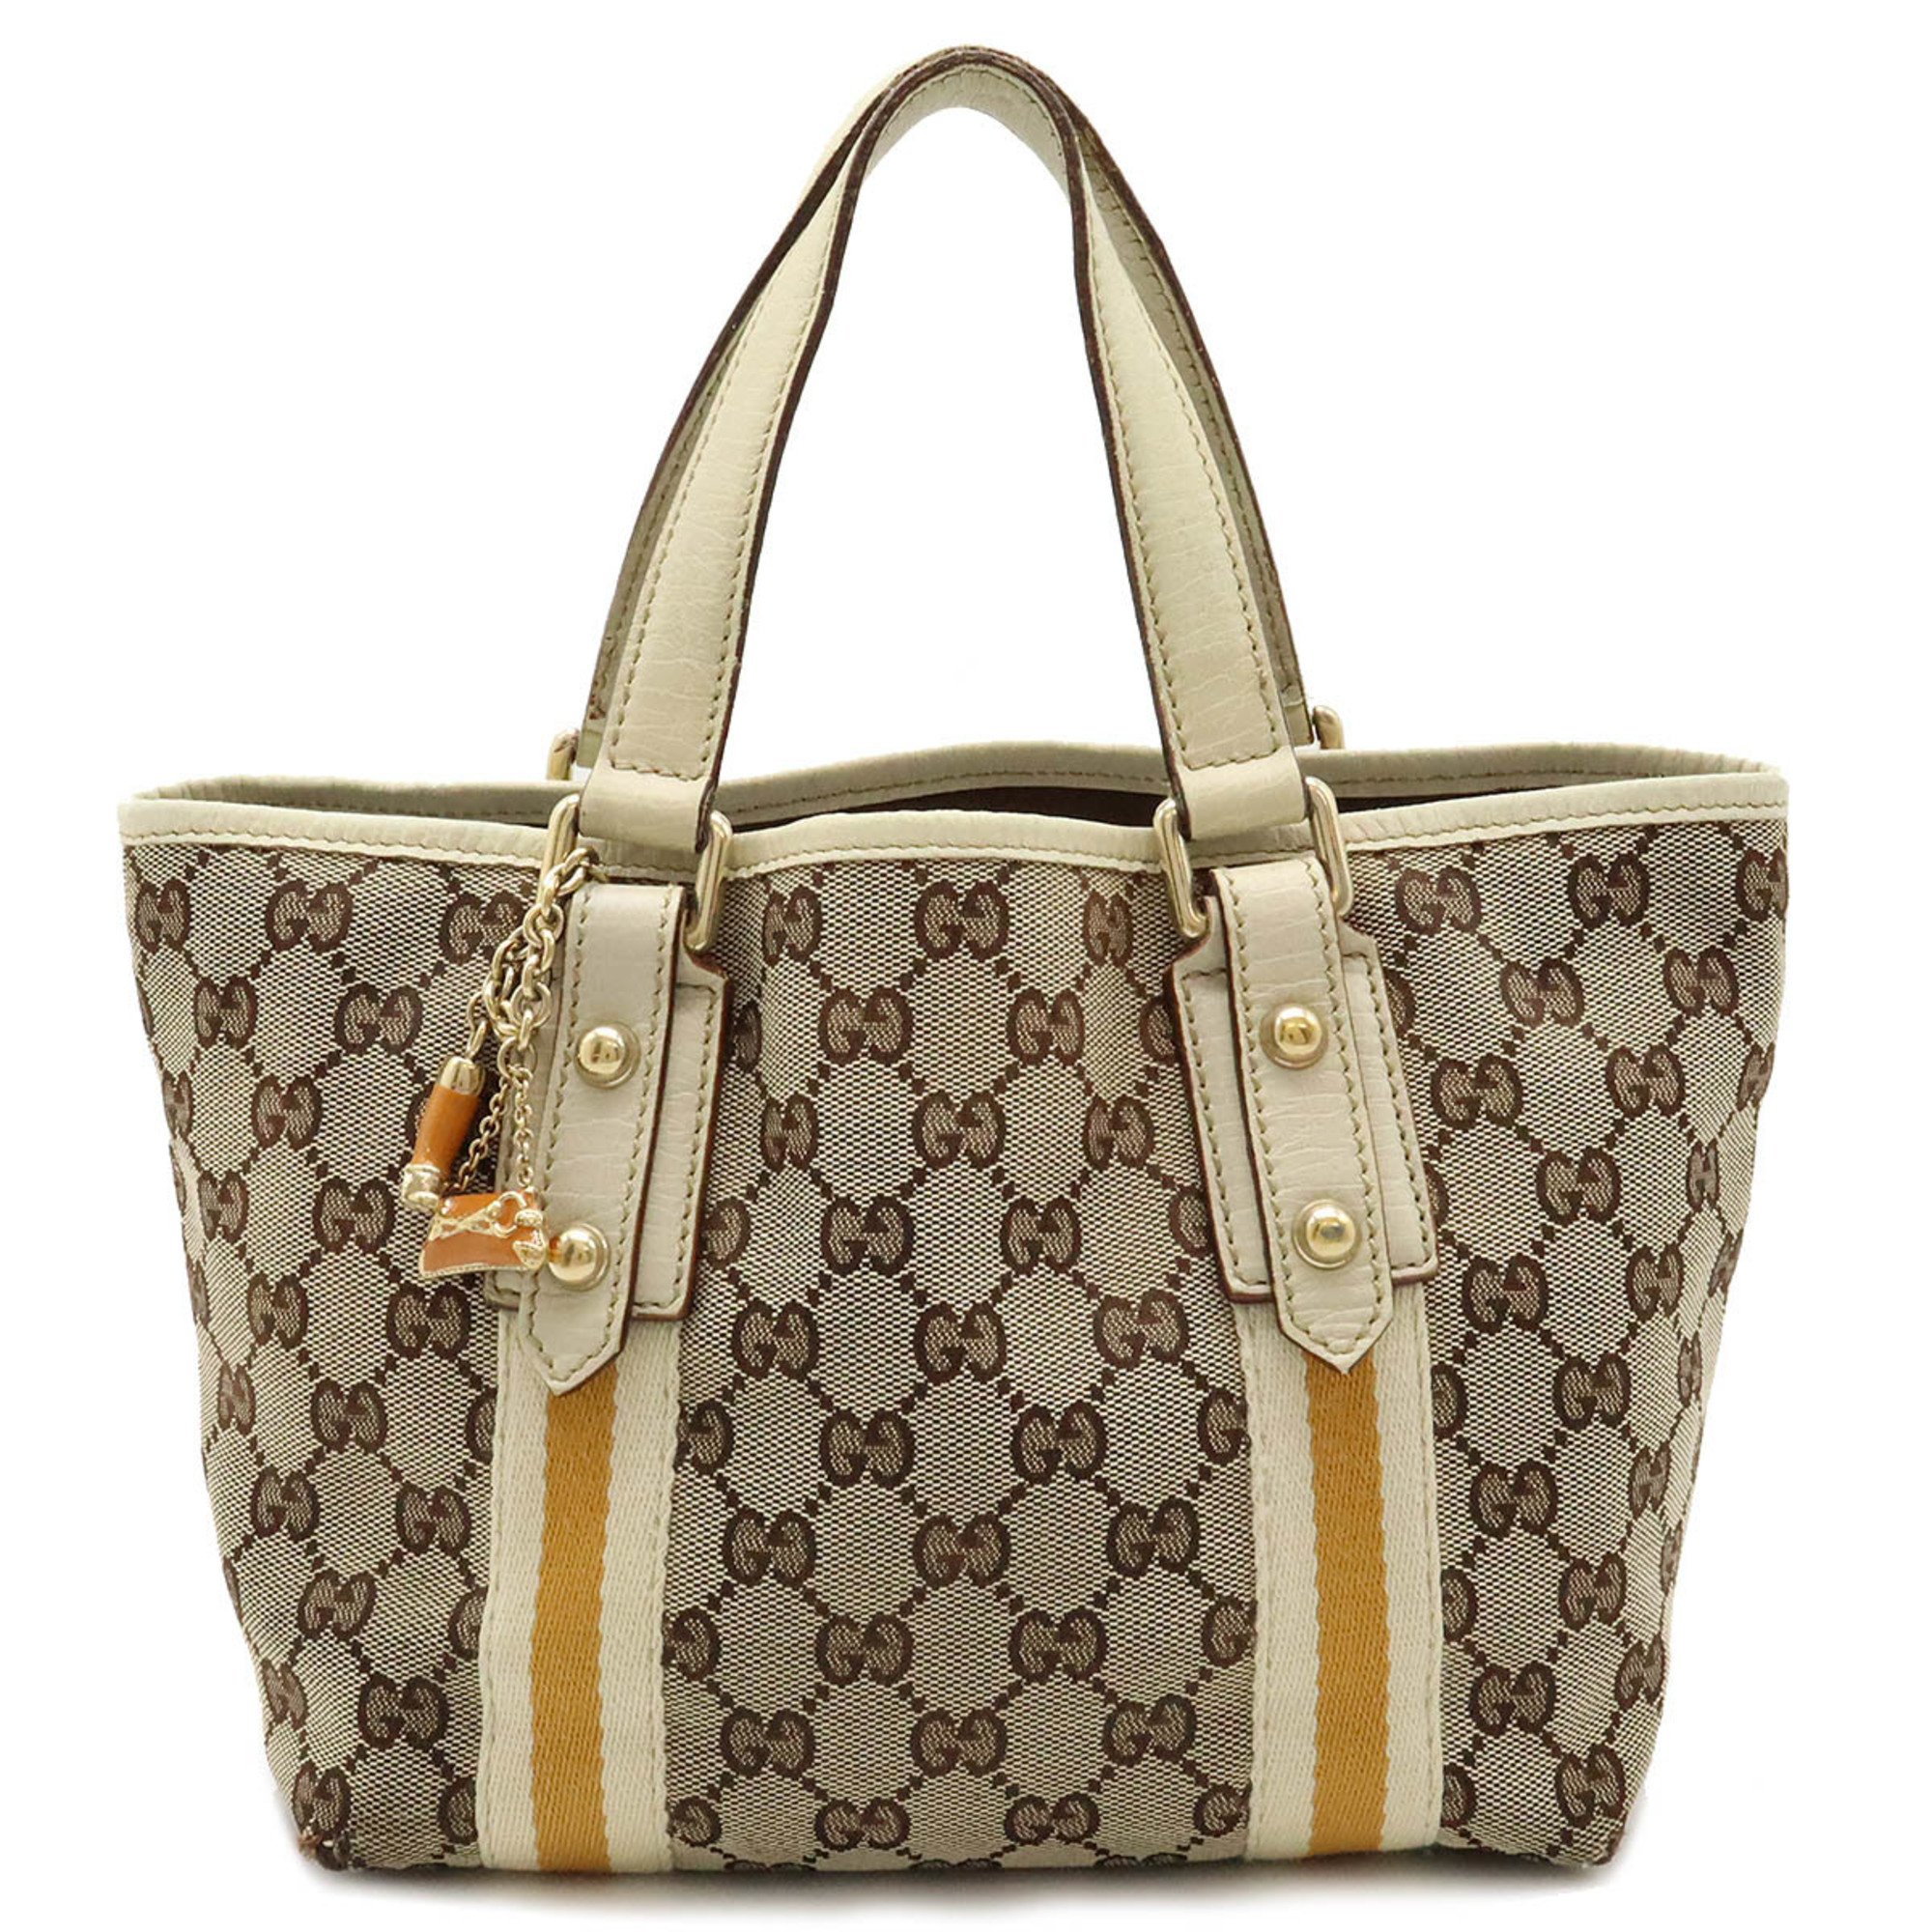 GUCCI Gucci GG Canvas Sherry Line Tote Bag Handbag Leather Beige Ivory Mustard 139261